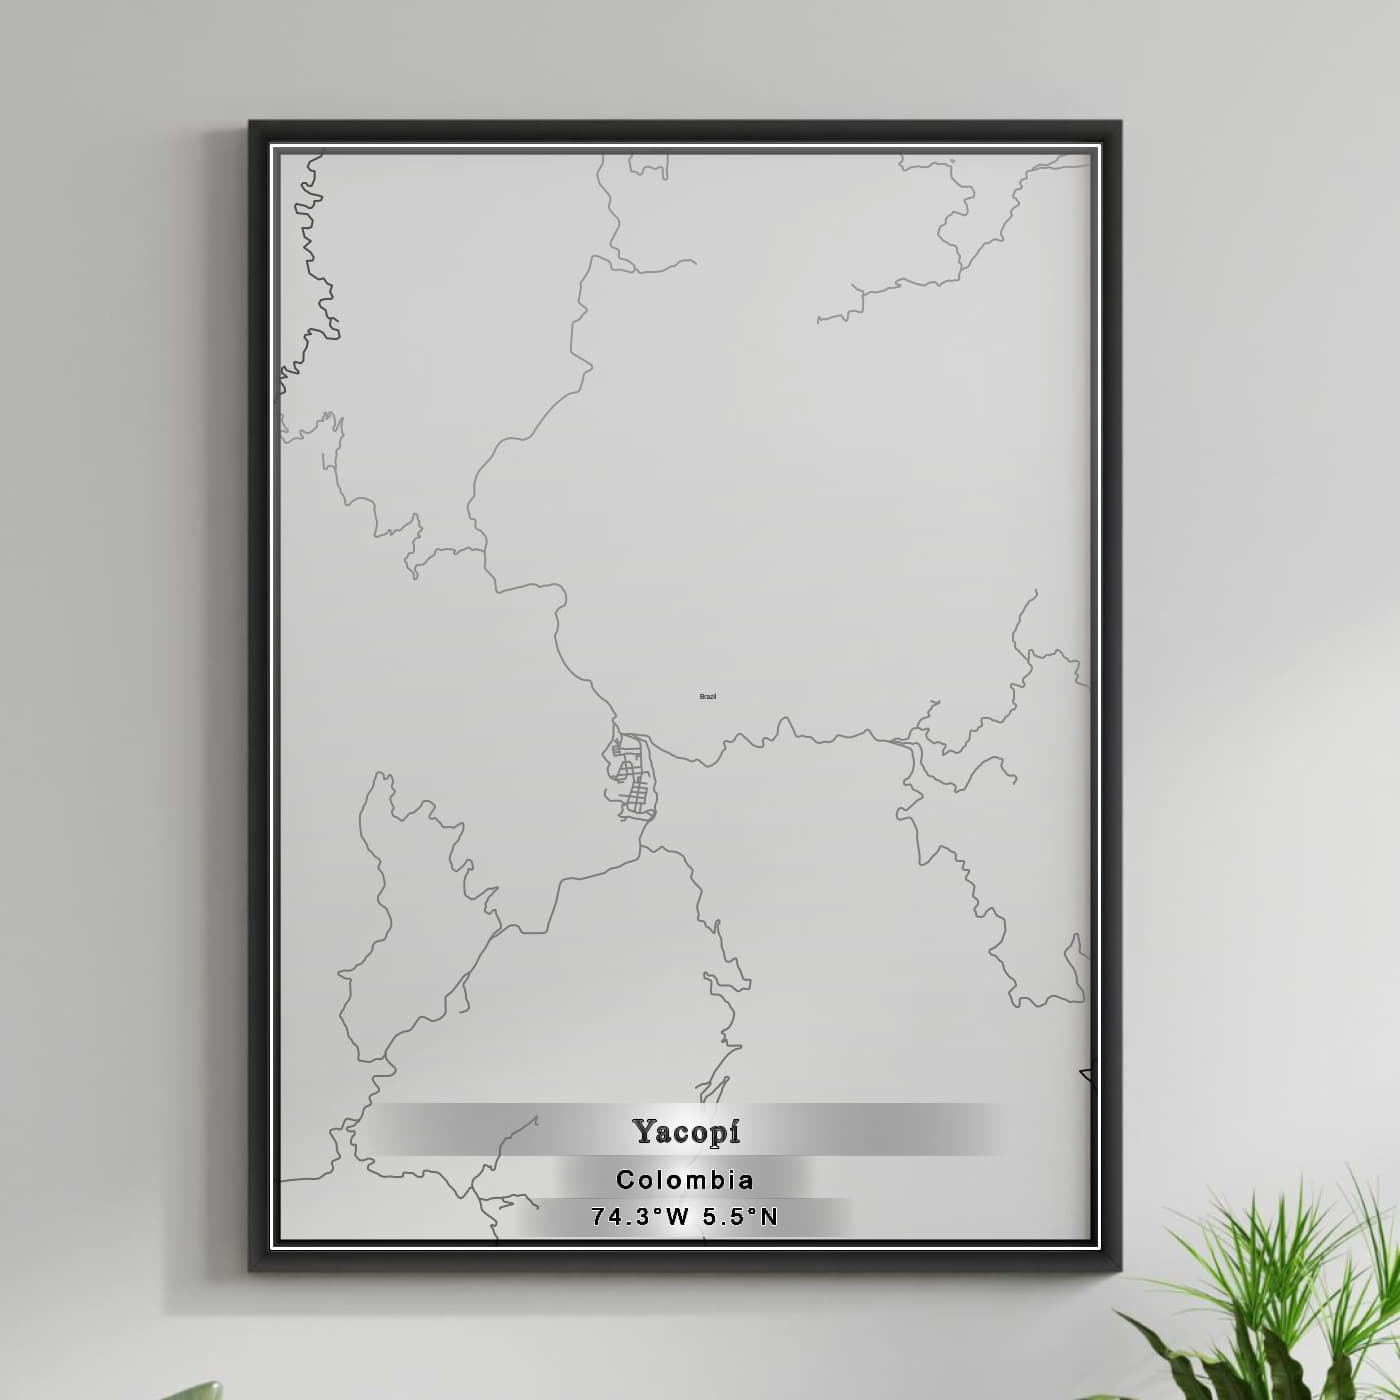 ROAD MAP OF YACOPI, COLOMBIA BY MAPBAKES